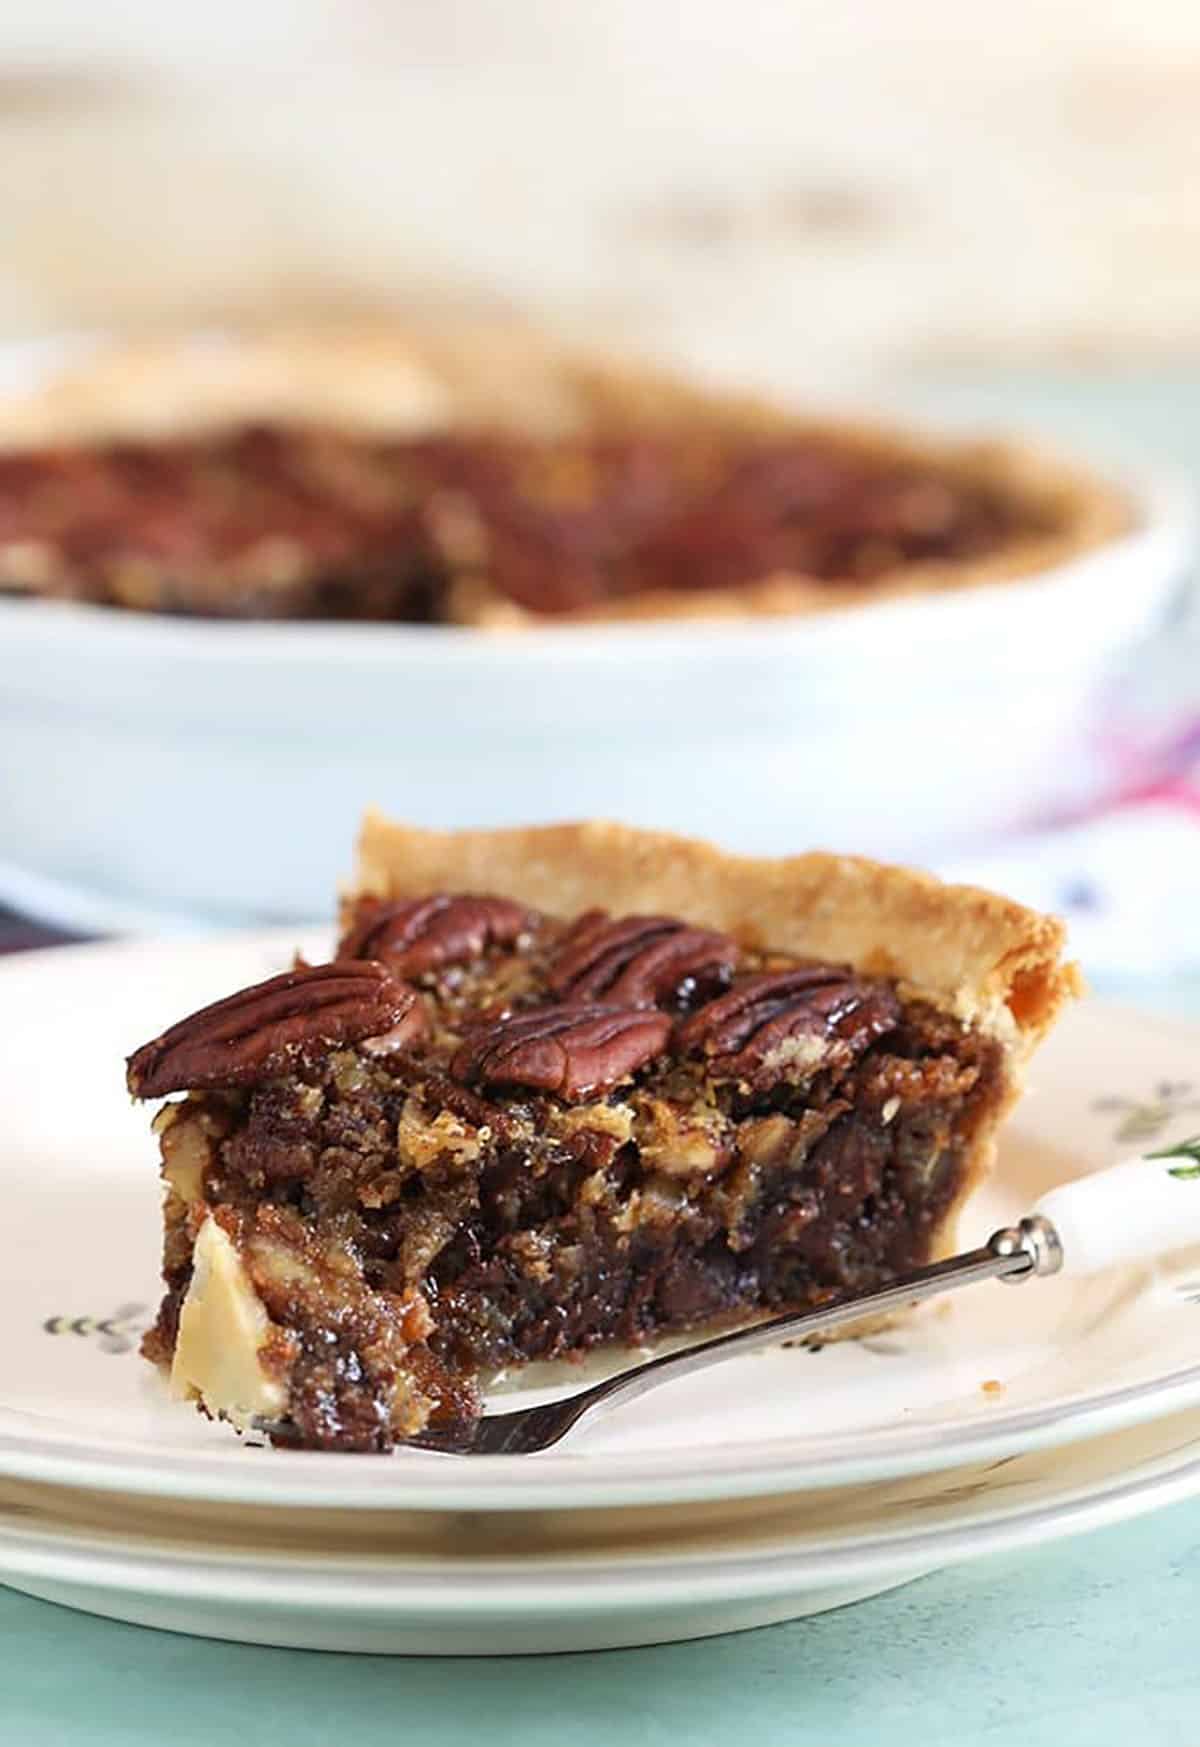 Close up of pecan pie with a bite taken off with a fork.